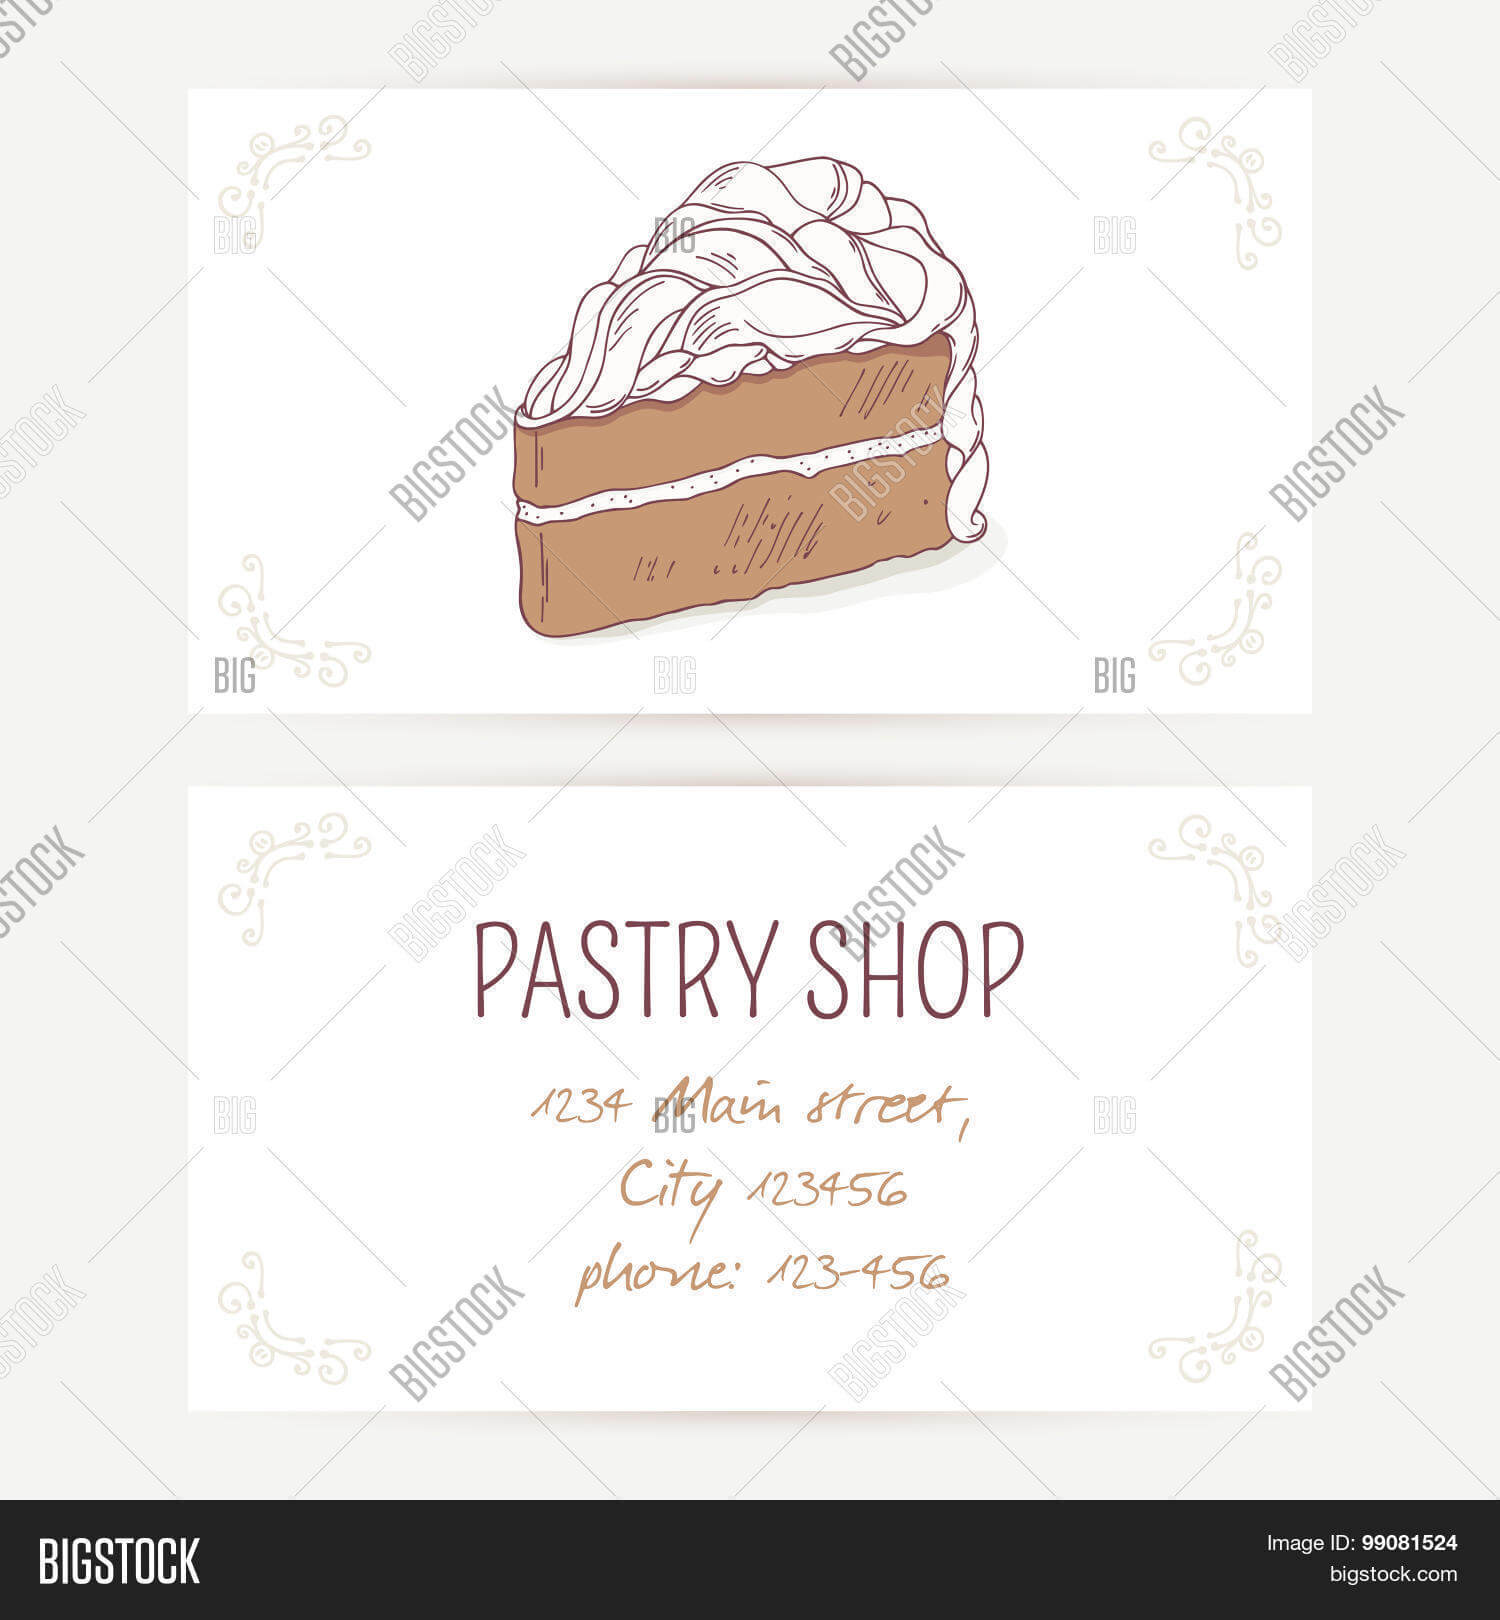 Business Card Vector & Photo (Free Trial) | Bigstock Throughout Cake Business Cards Templates Free